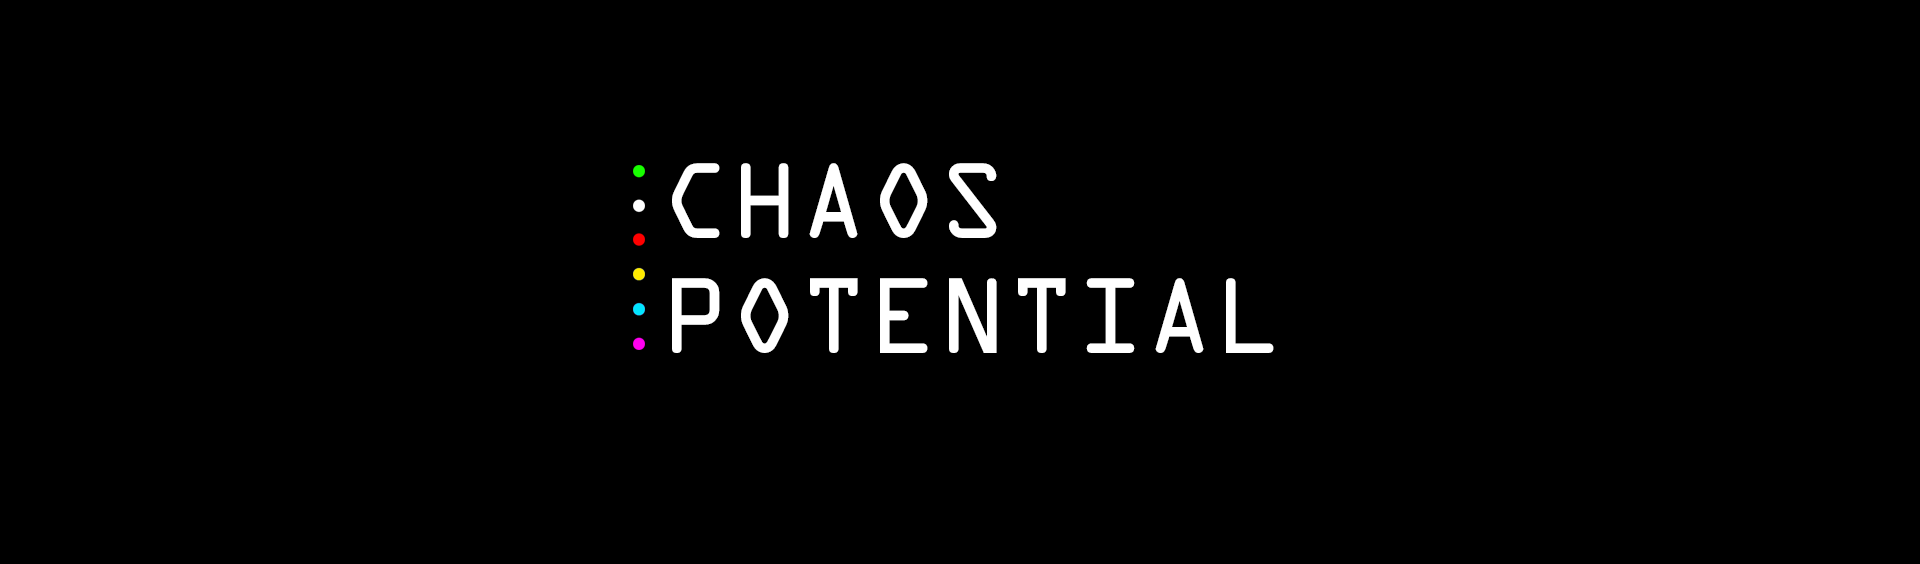 Chaos Potential